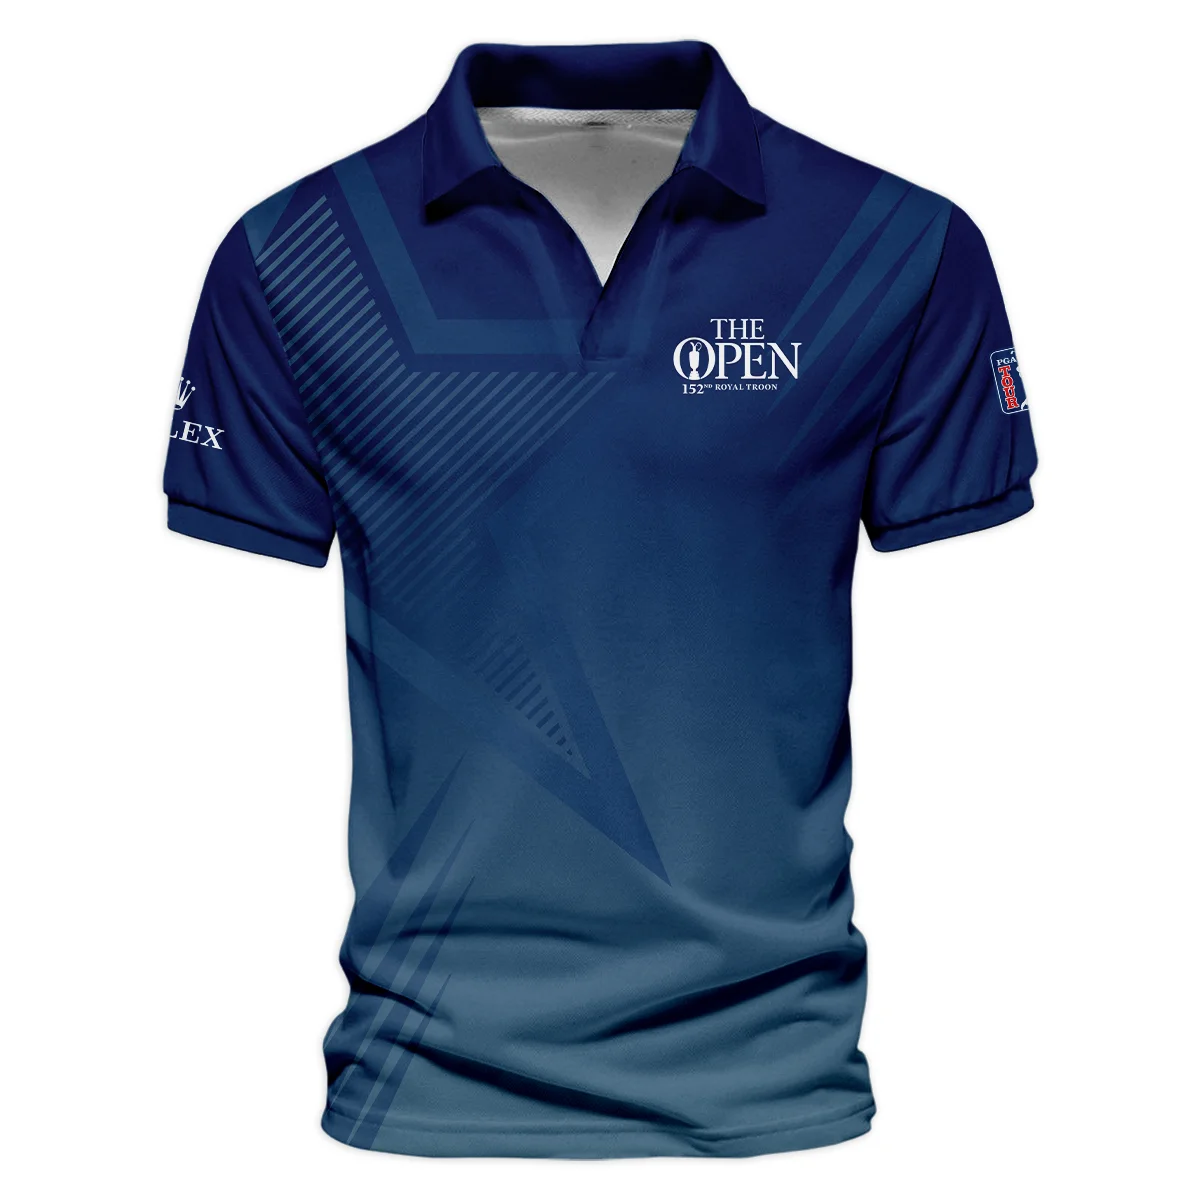 Rolex 152nd Open Championship Abstract Background Dark Blue Gradient Star Line Performance Quarter Zip Sweatshirt With Pockets All Over Prints HOTOP260624A04ROXTS